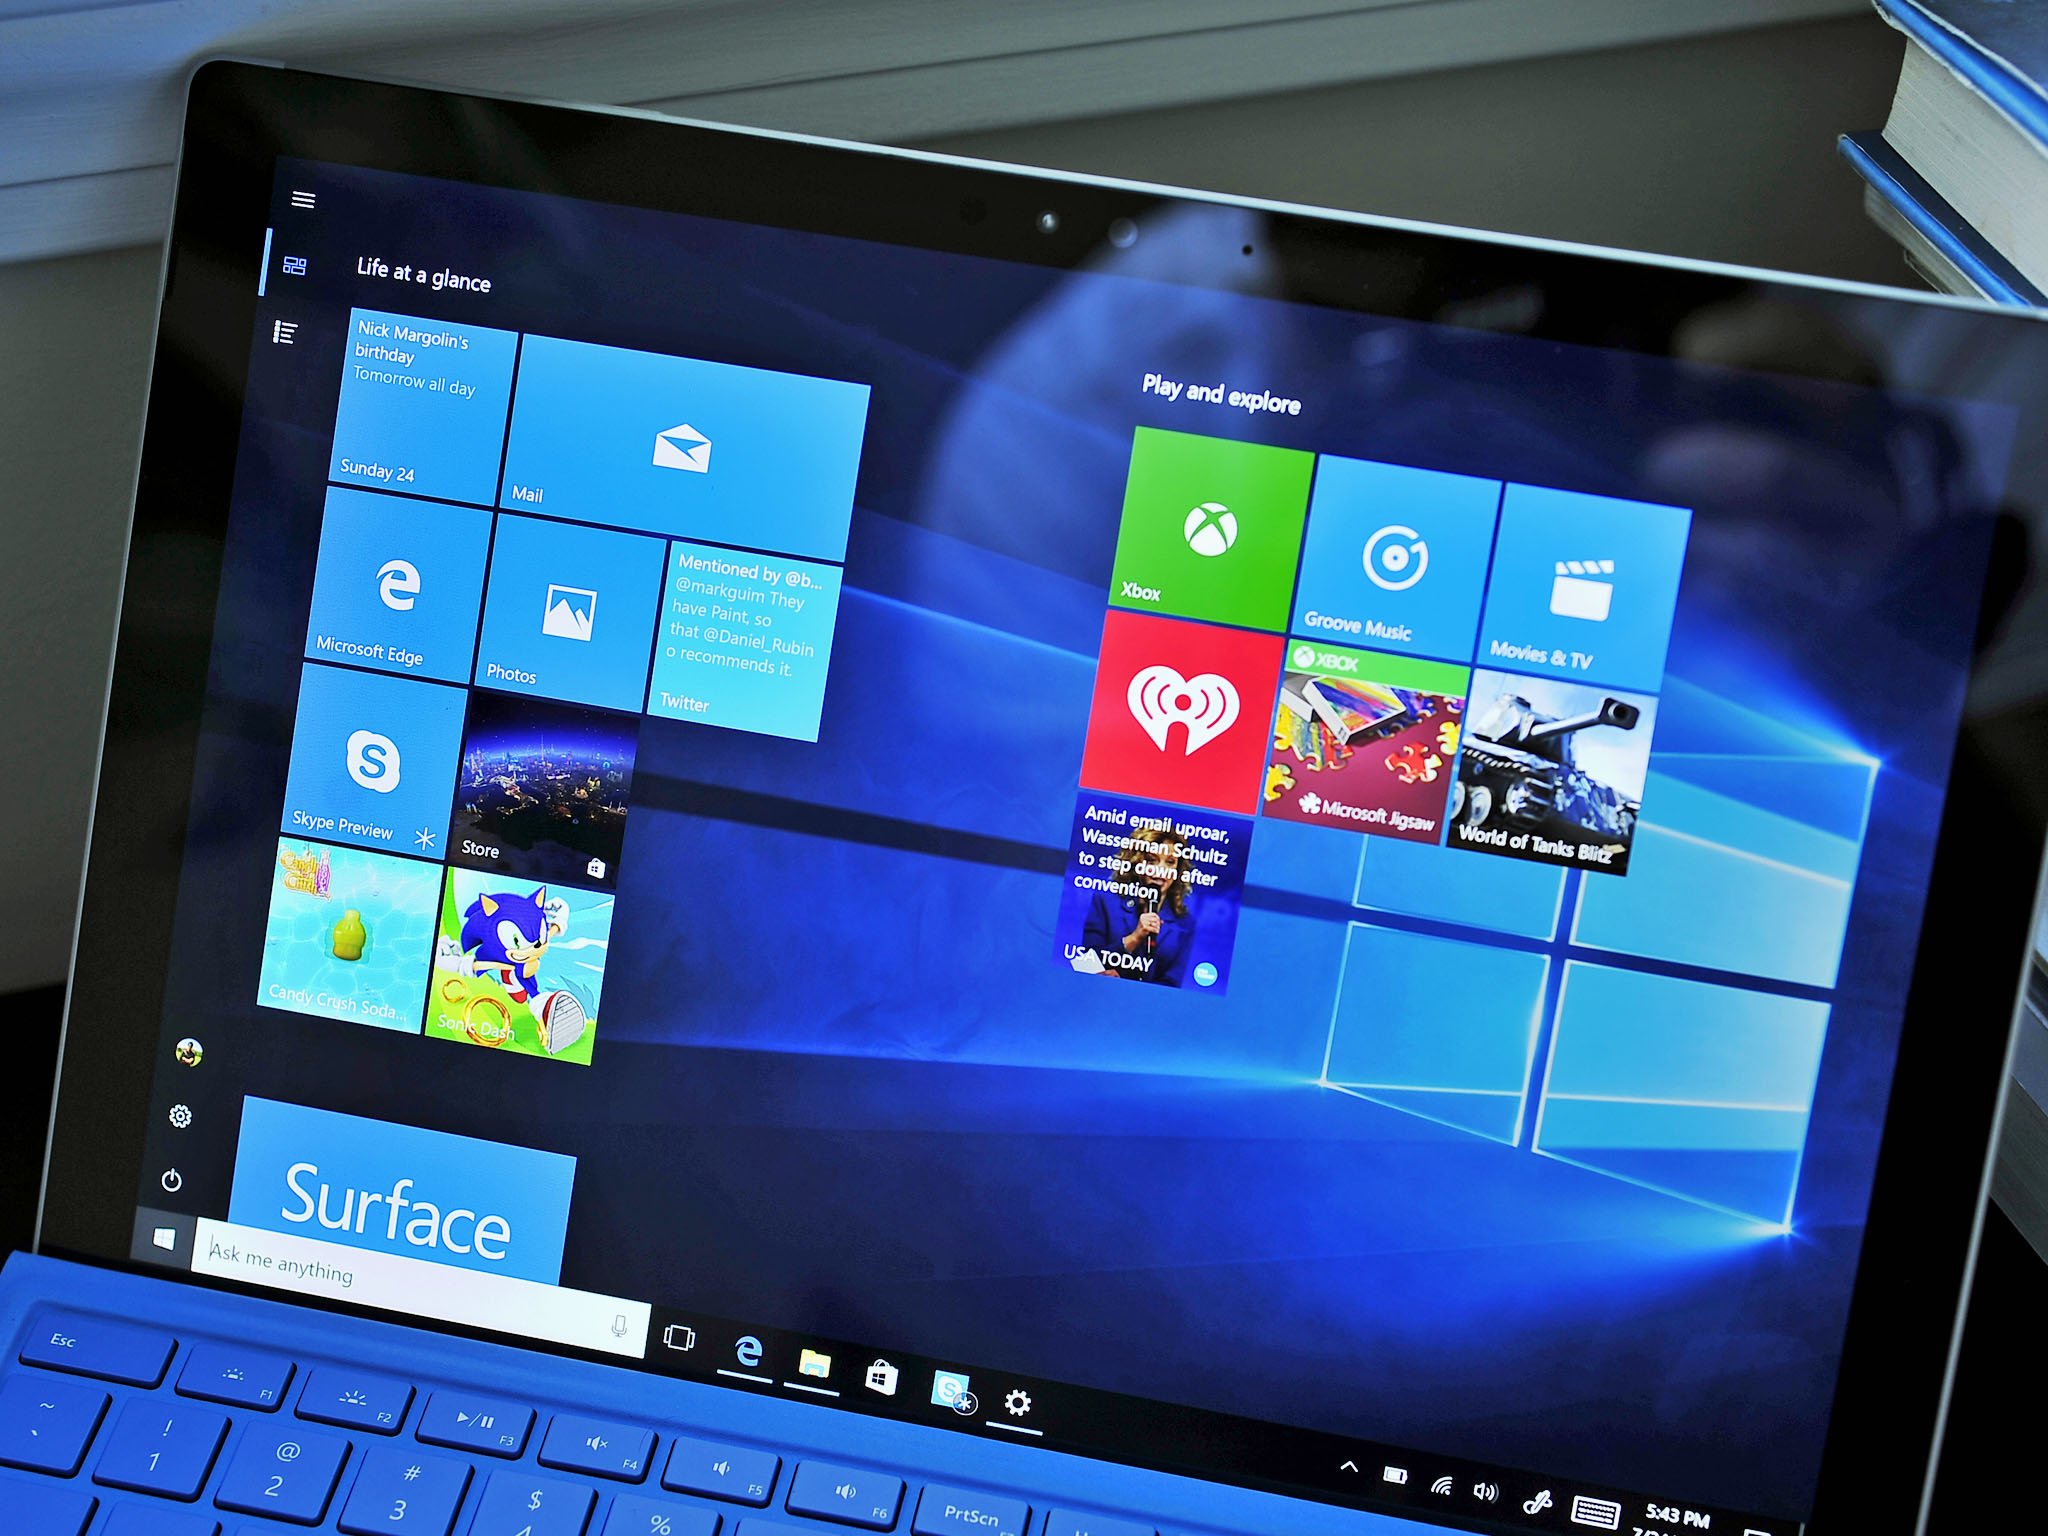 Support for Windows 10 version 1511 extended by six months for education, enterprise users